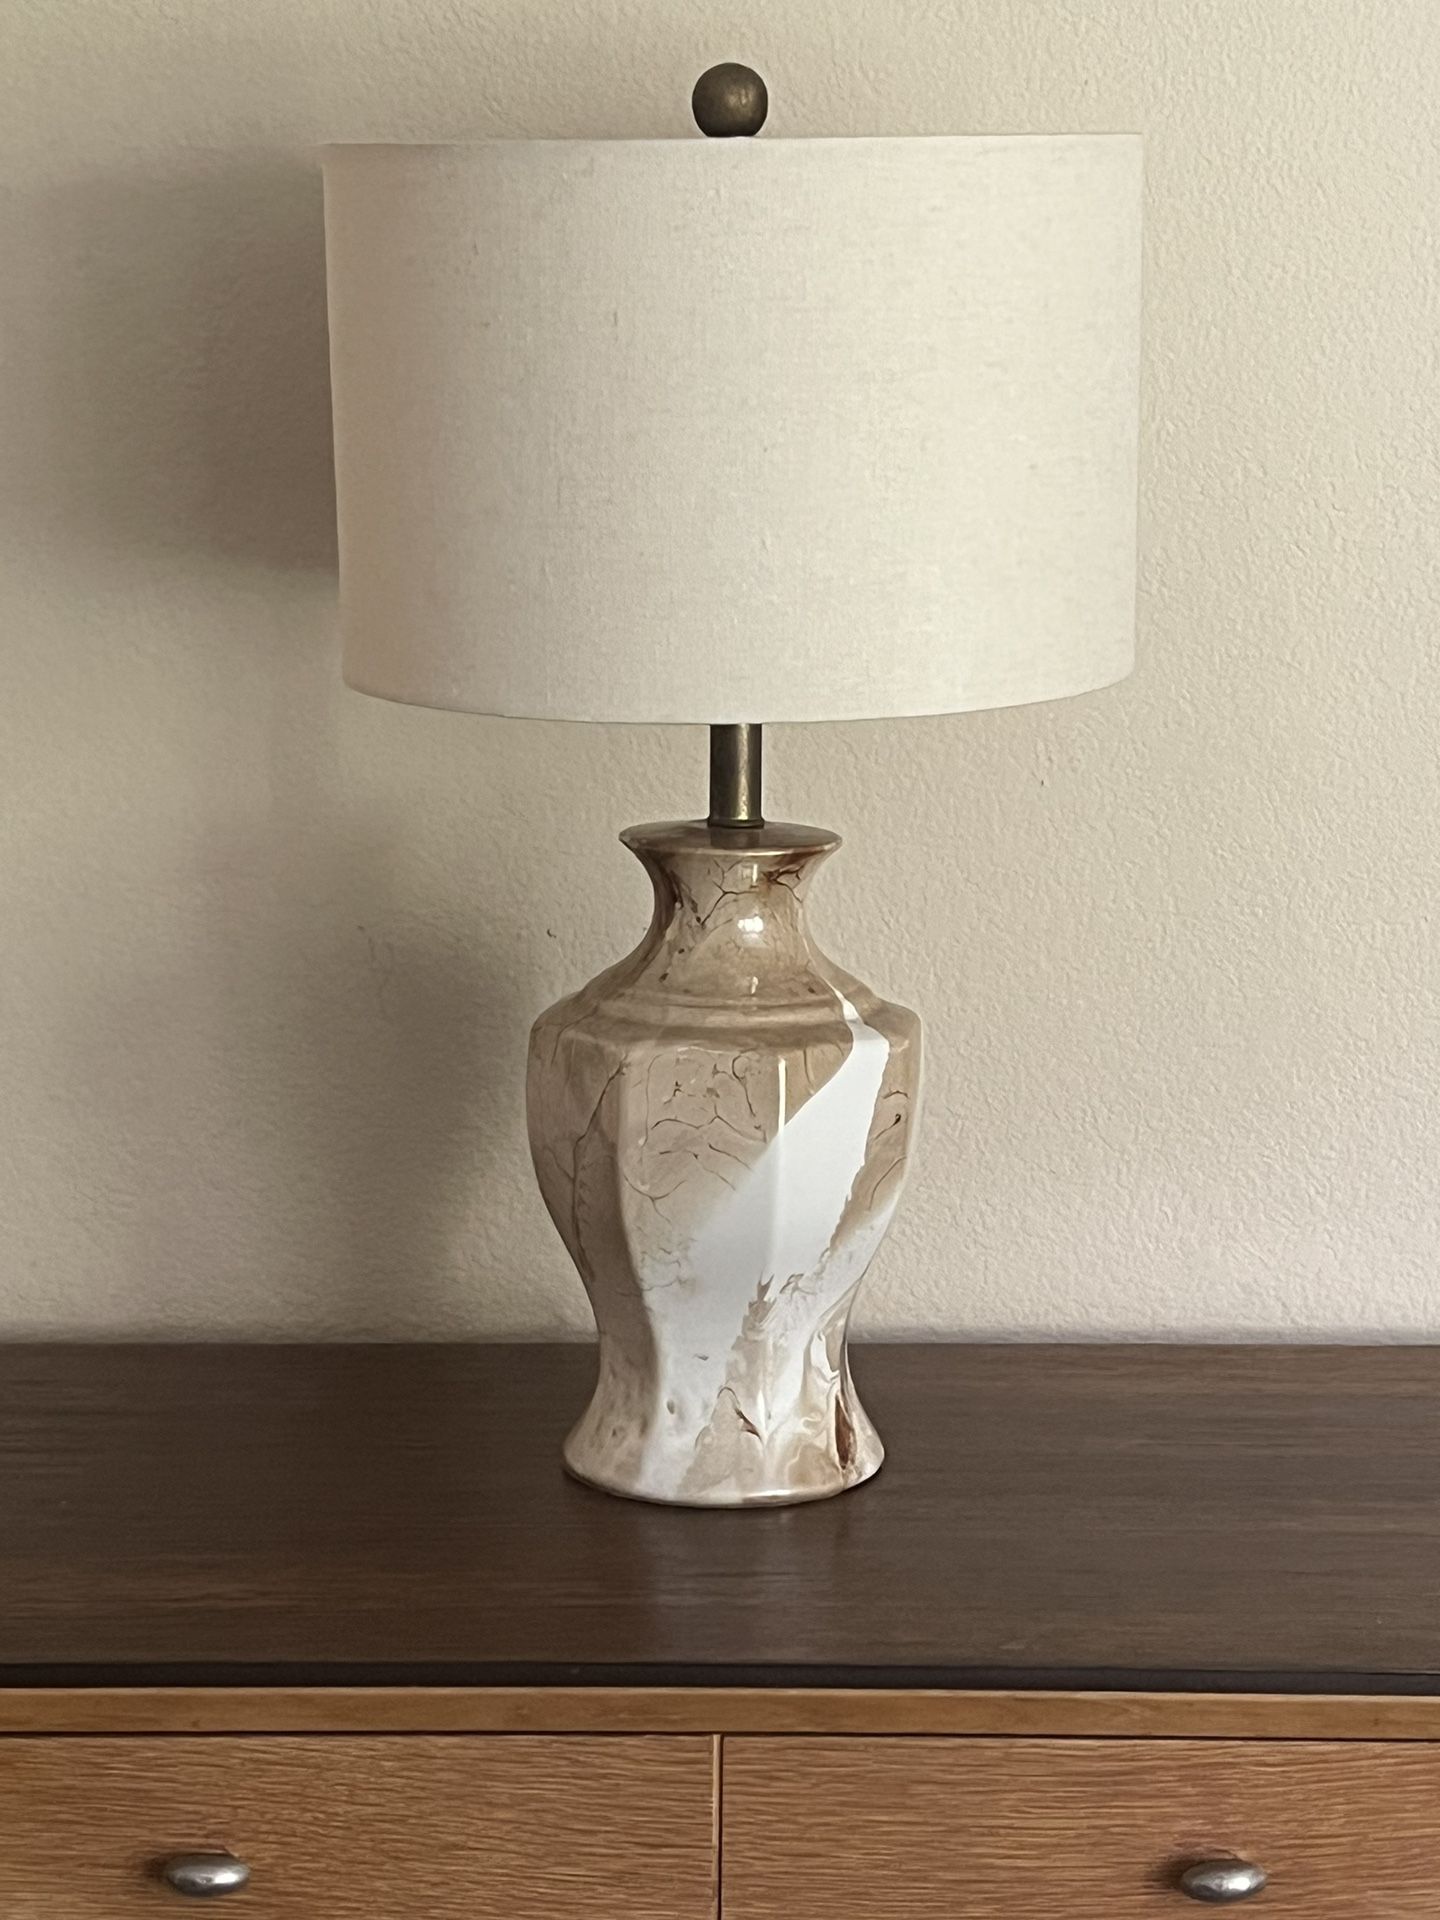 Faux Marble, Vintage Ceramic Lamp. 23” High With Shade.